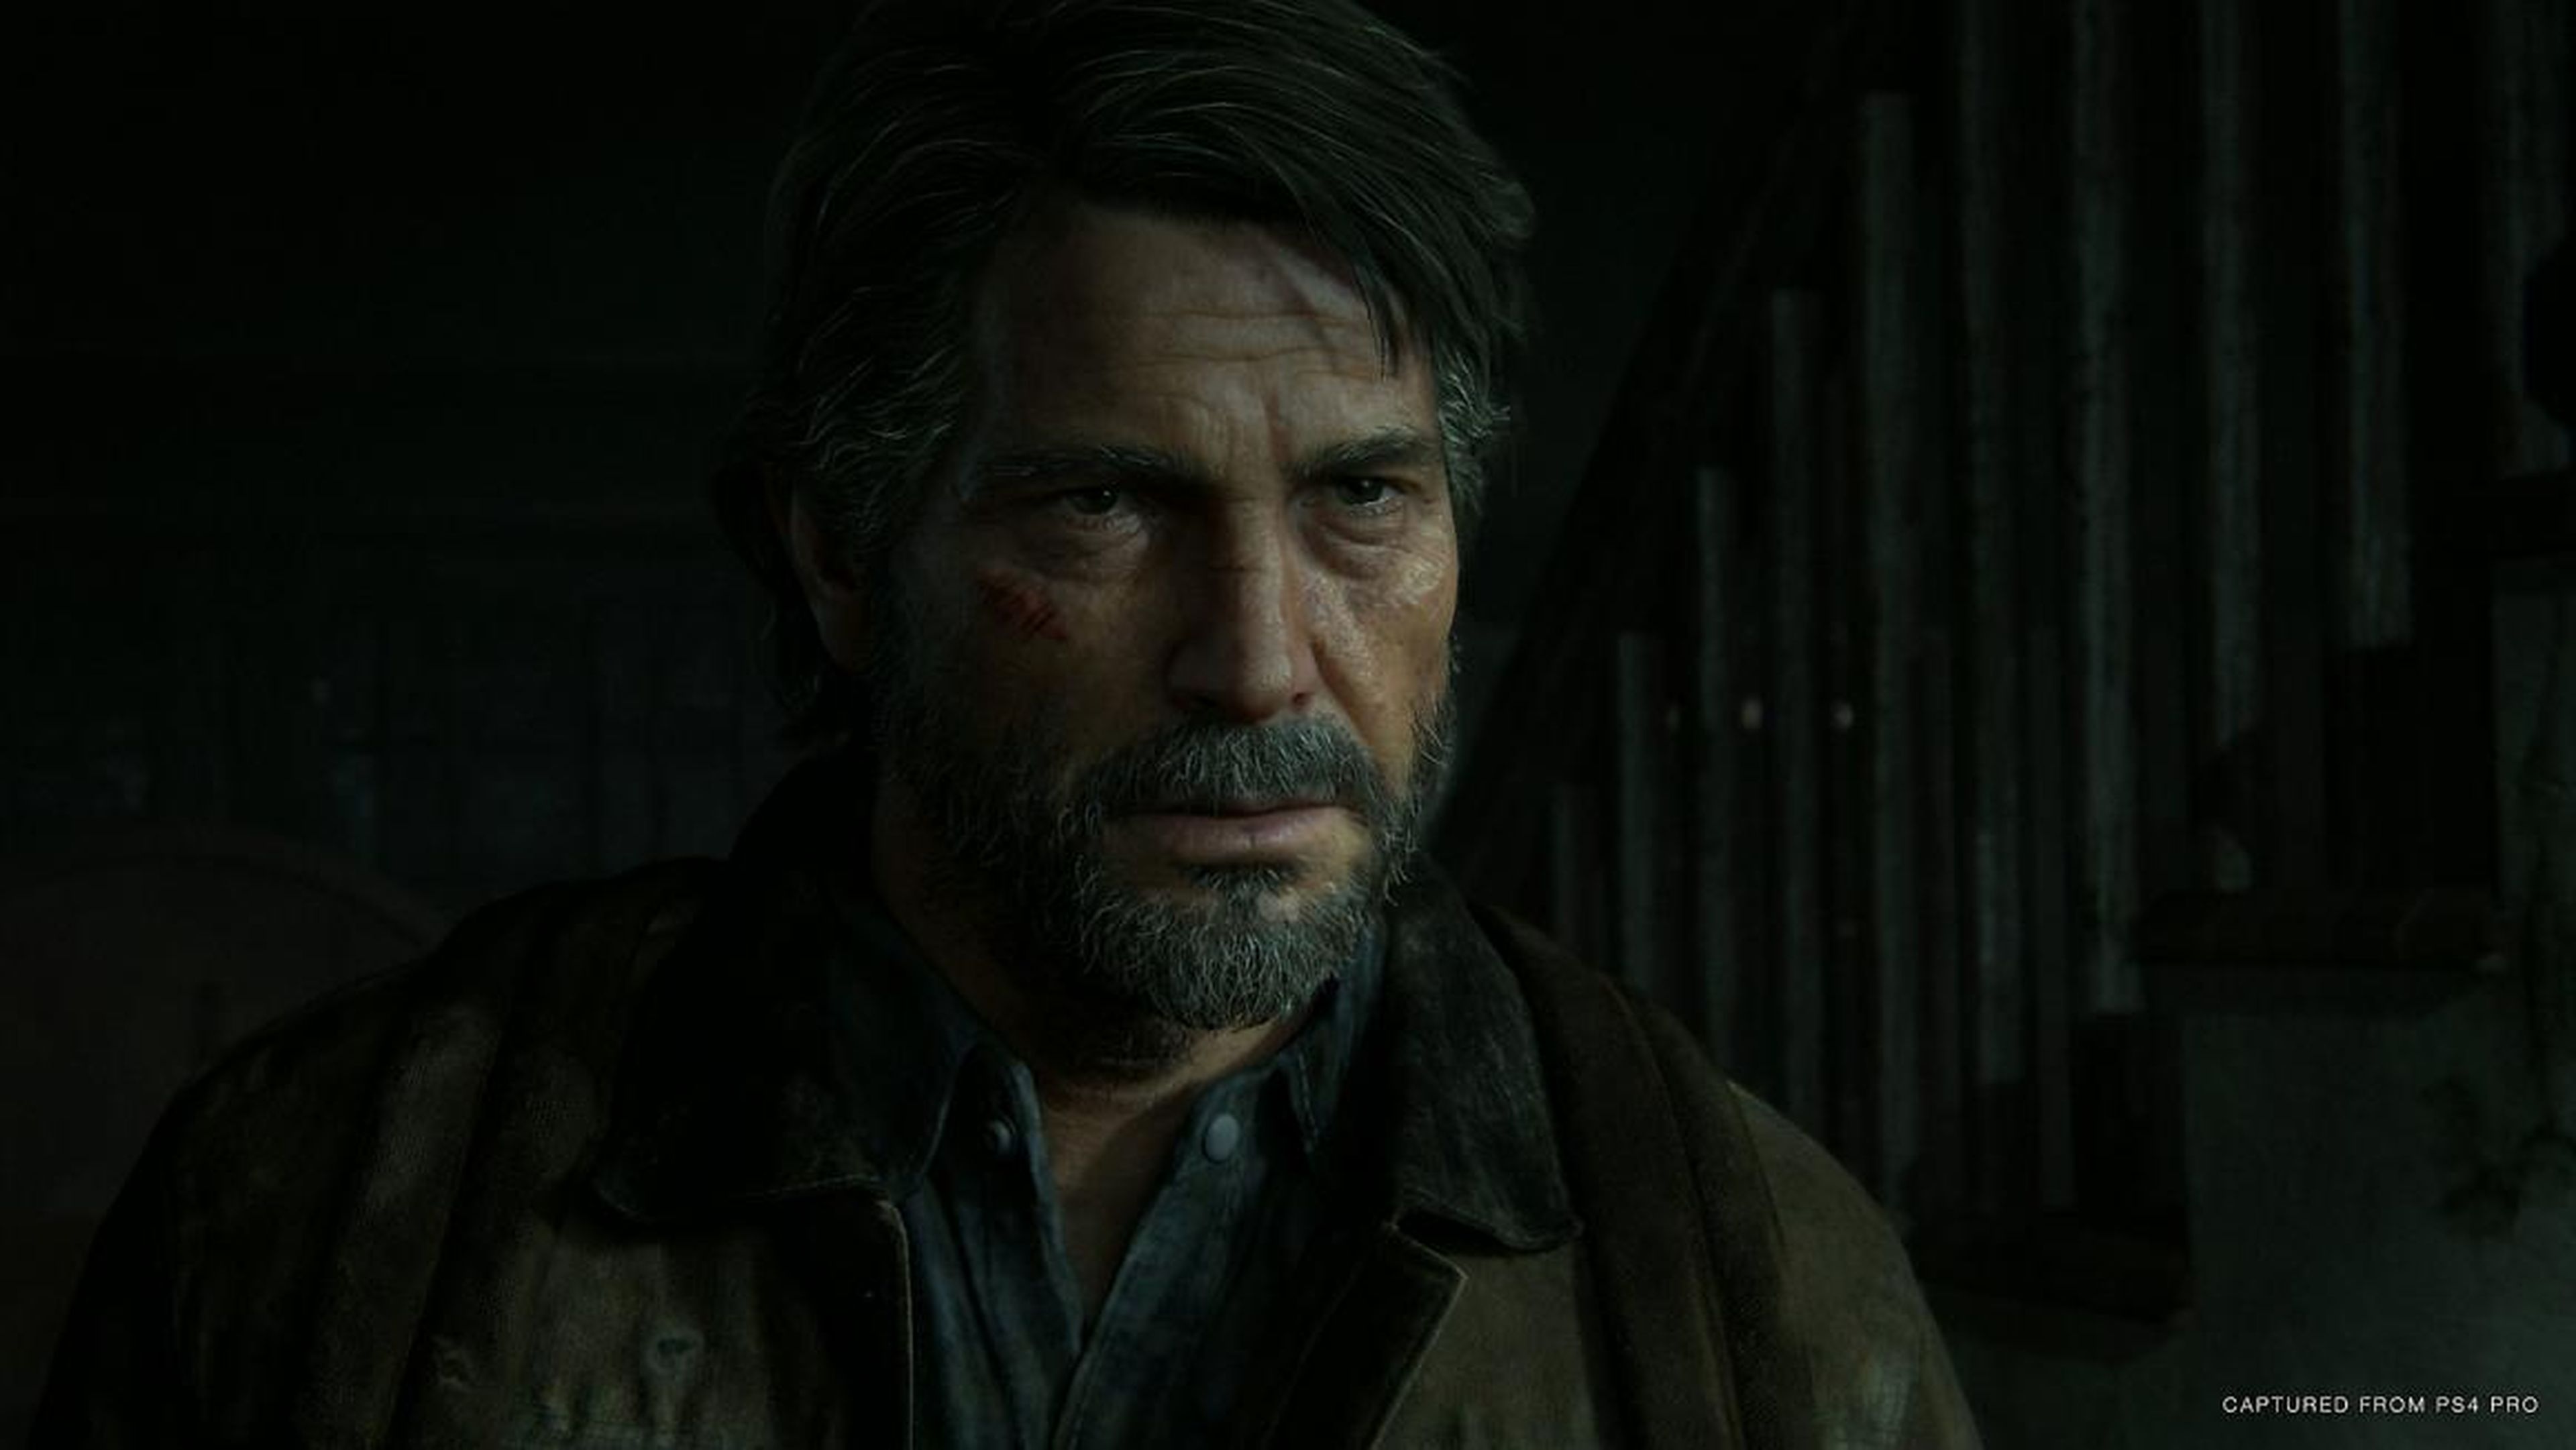 Joel, the man who helped guide Ellie through "The Last of Us," shows up to help her in "Part II," but it seems like the two haven't seen each other in a long time.